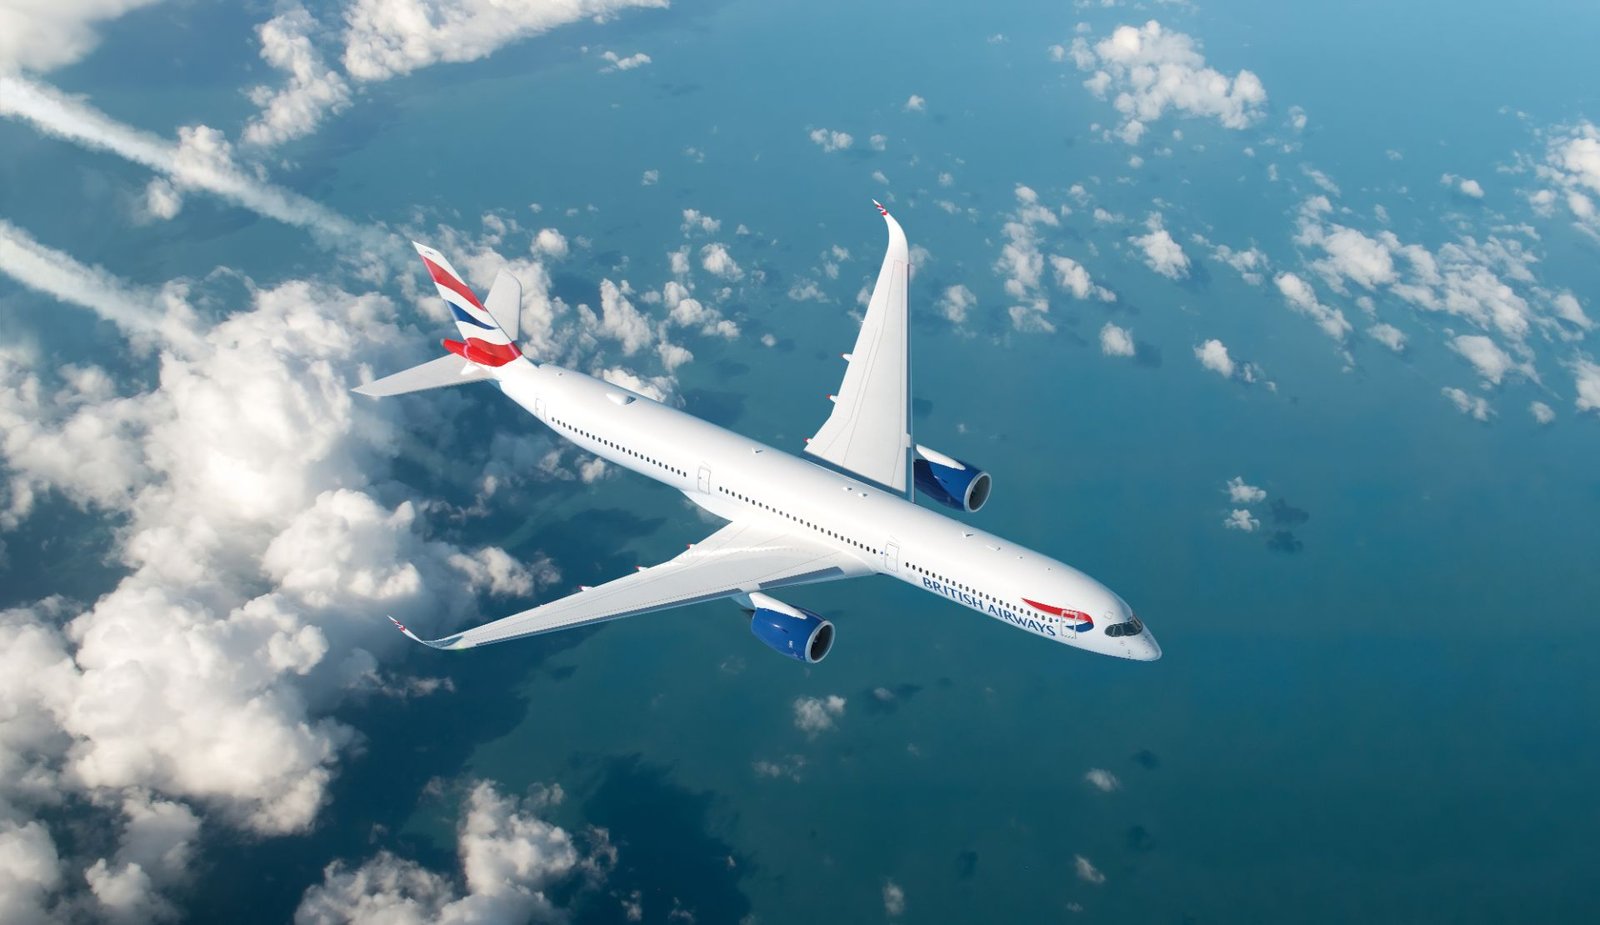 Aircraft CGI Renders and Visualisations by Neutral Digital – British Airways A350